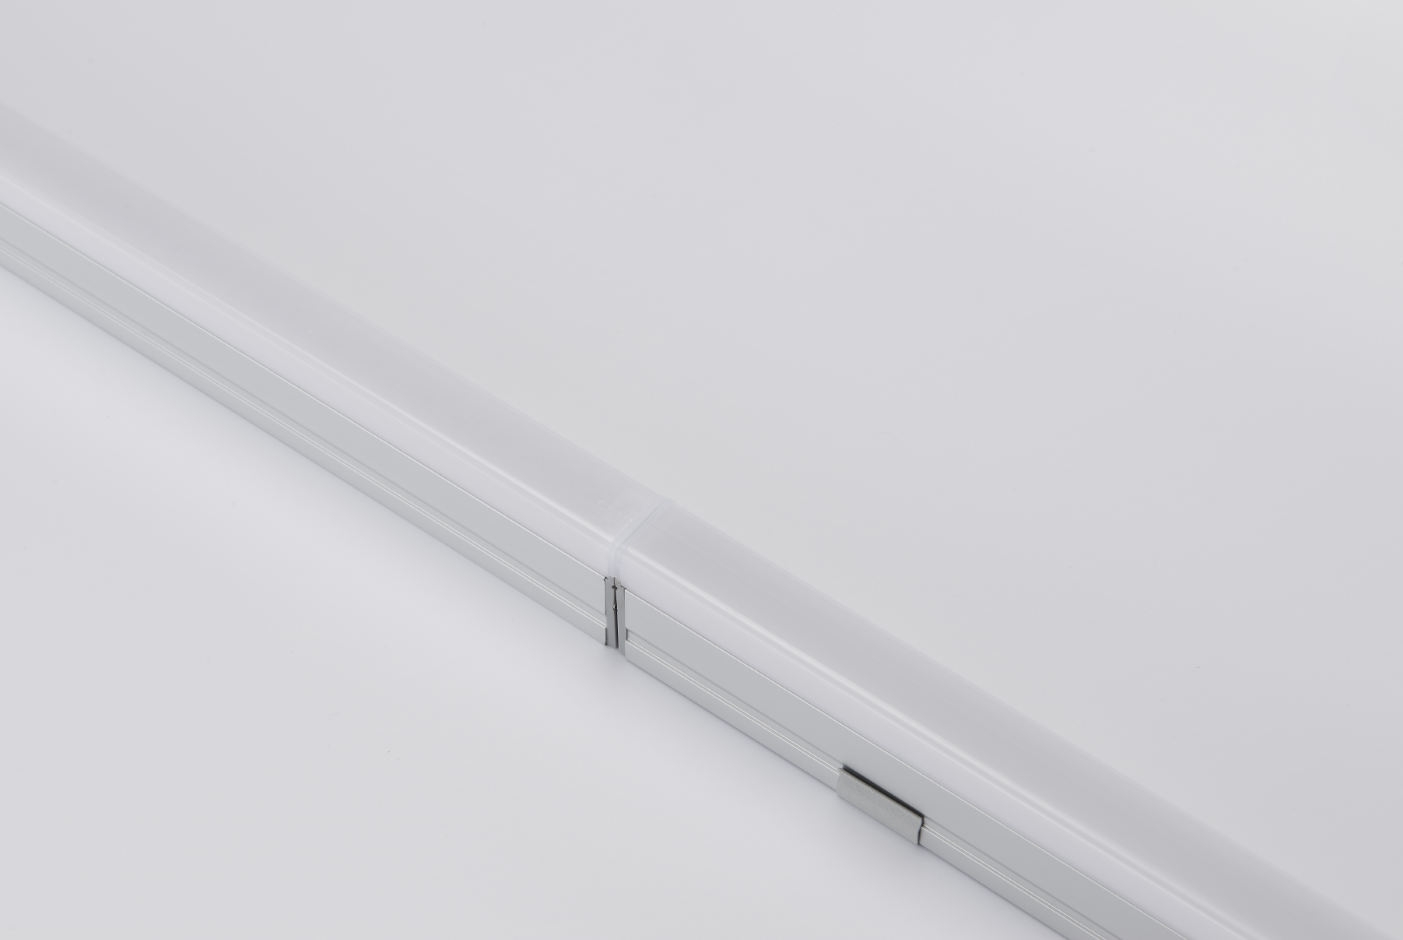 RH-C26 2021 Hot sell new product ip66 architectural linear lighting with 1 inch profile light